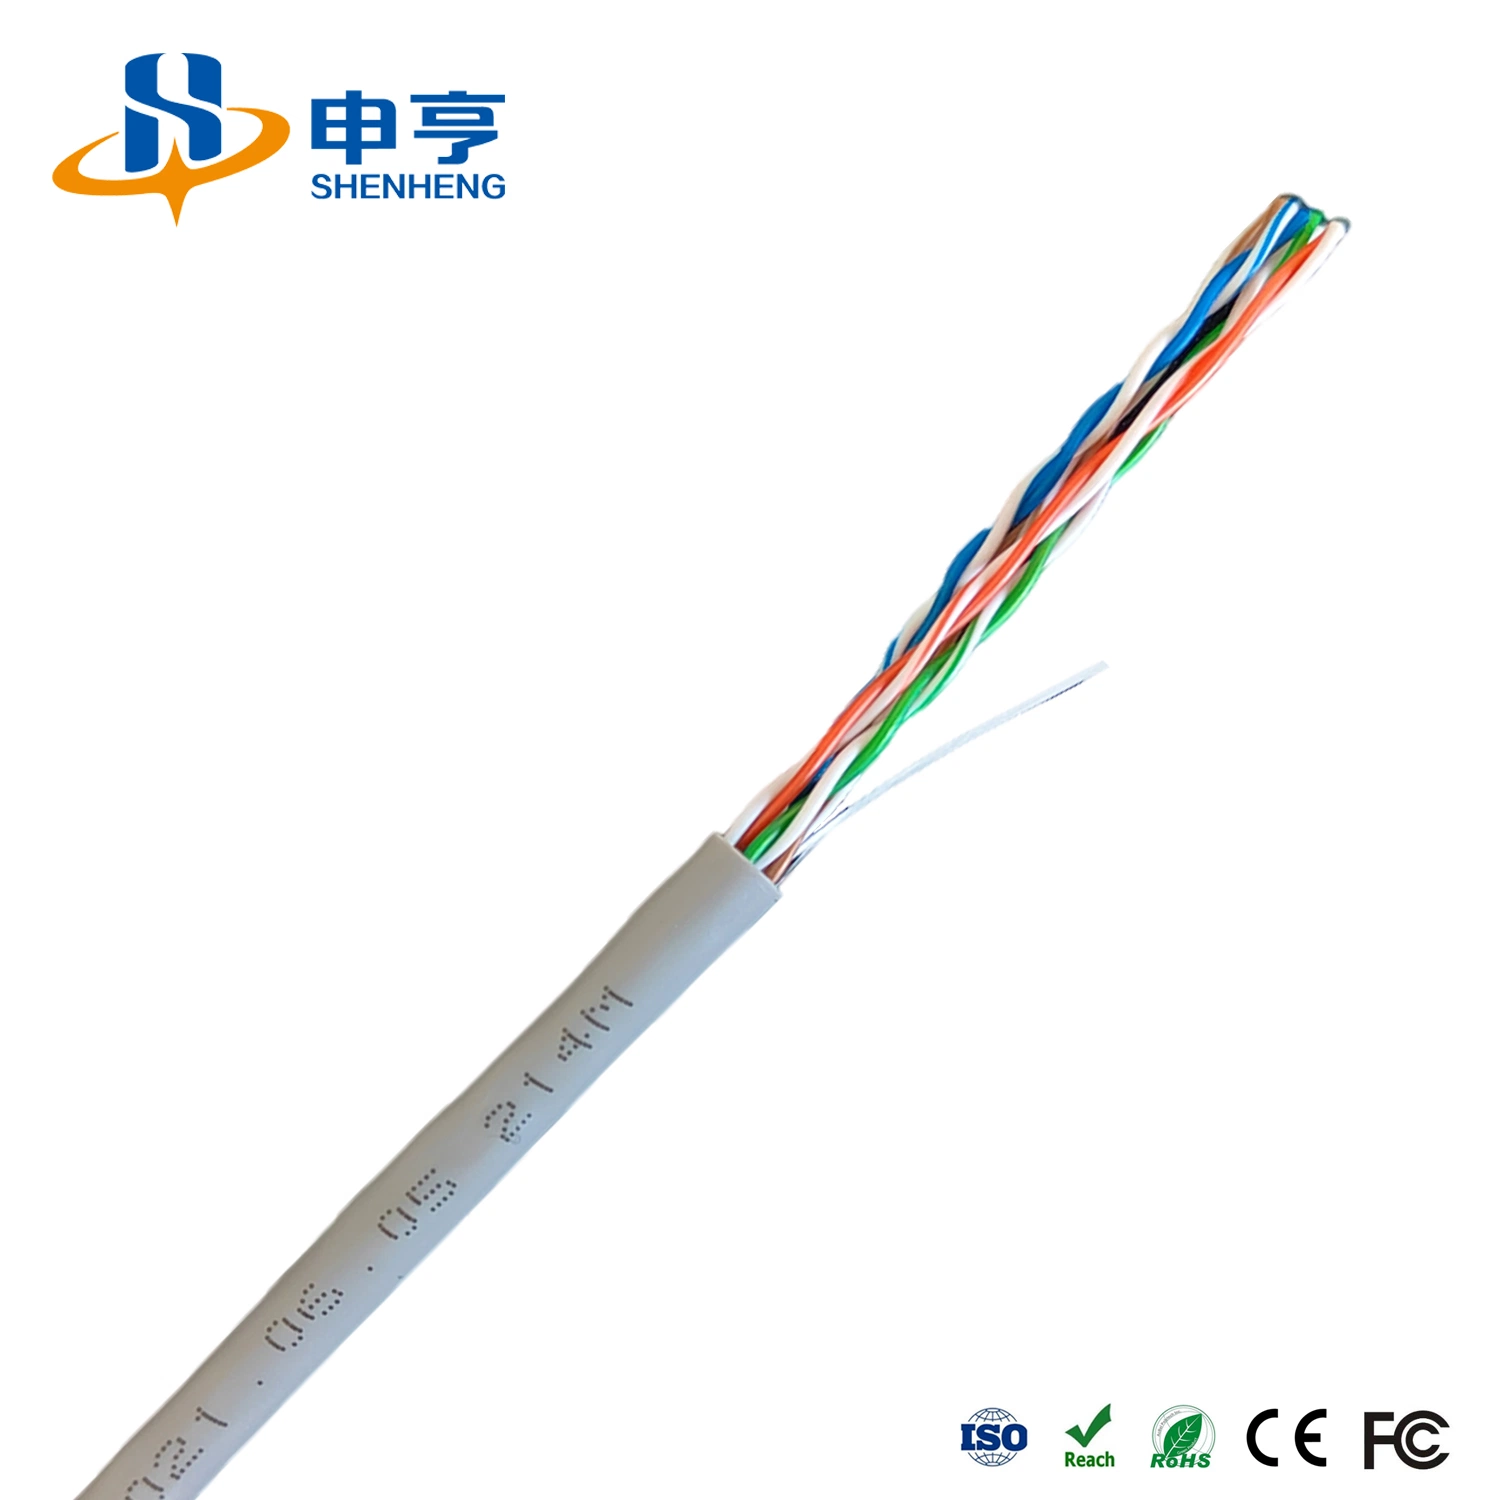 Network Products PVC/LSZH Network Cable/LAN Cable UTP Cat5e Cable 24AWG, Copper Wire Data Cable Communication Cable Factory Price Cat5e Ethernet Network Cable